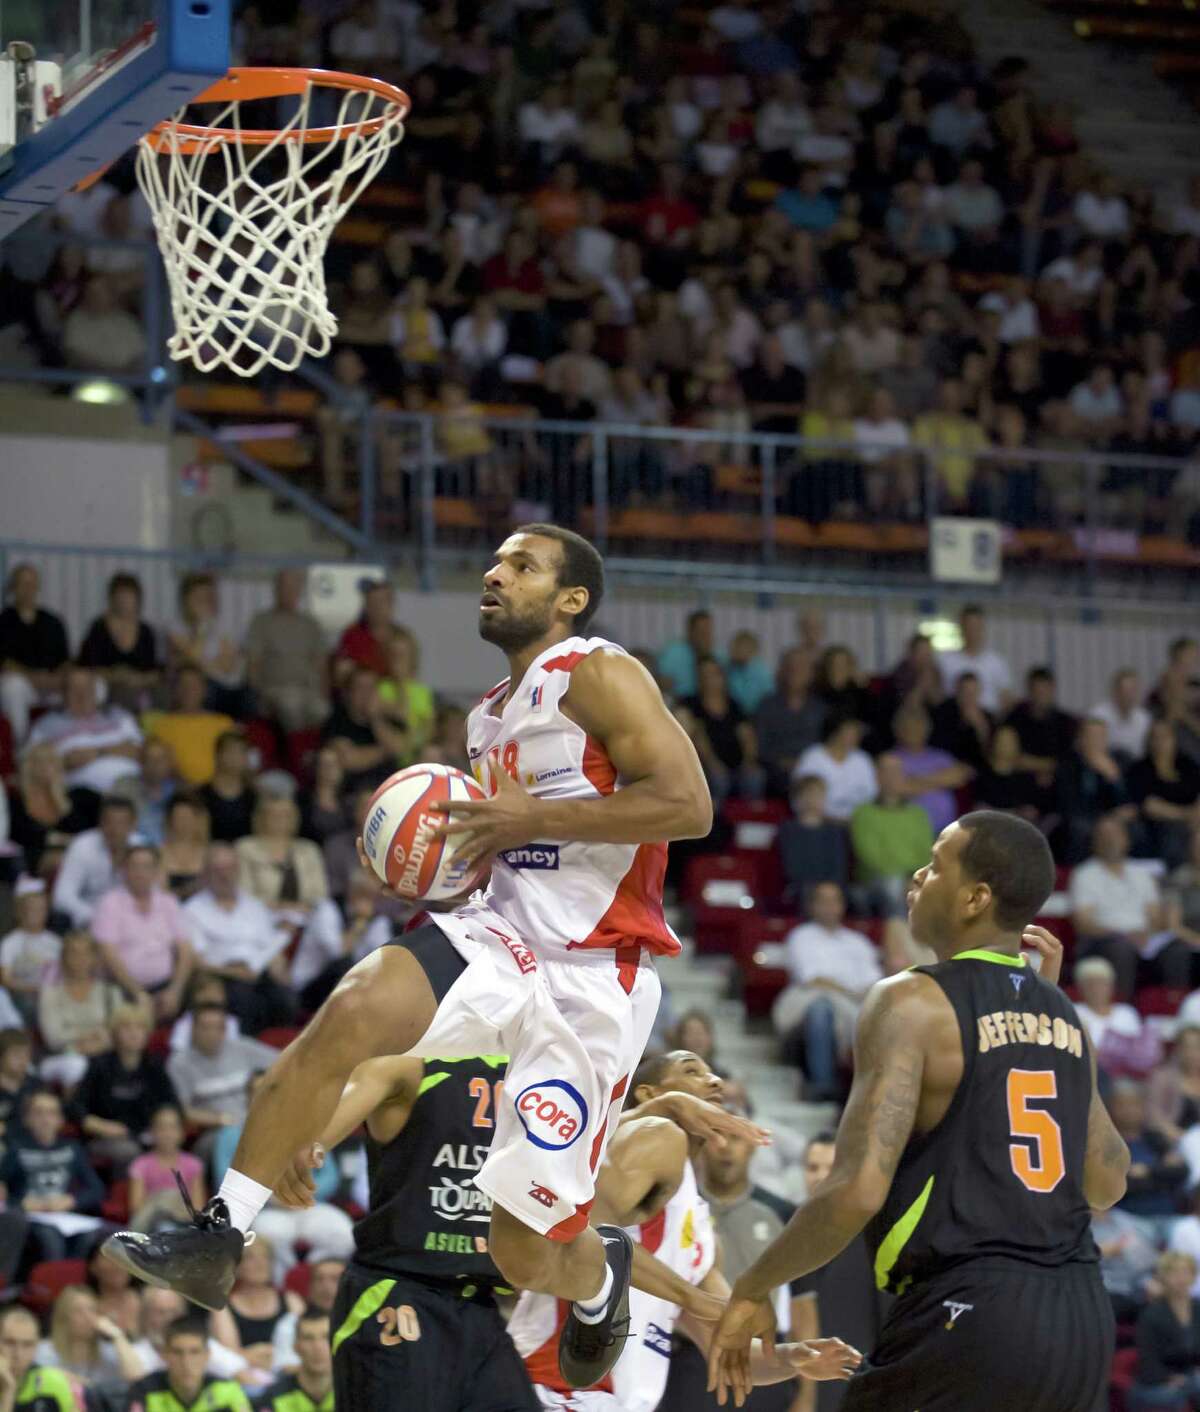 Nancy's US point guard Willie Deane (L) goes to the basket past Asvel's US forward Davon Jefferson(R) during the first leg of their French ProA basketball playoffs semi-finals match Nancy vs Lyon-Villeurbanne, on May 28th, 2010 at Jean Weille Gymnasium in Nancy. Nancy won 109-93. AFP PHOTO/JEAN-CHRISTOPHE VERHAEGEN (Photo credit should read JEAN-CHRISTOPHE VERHAEGEN/AFP/Getty Images)